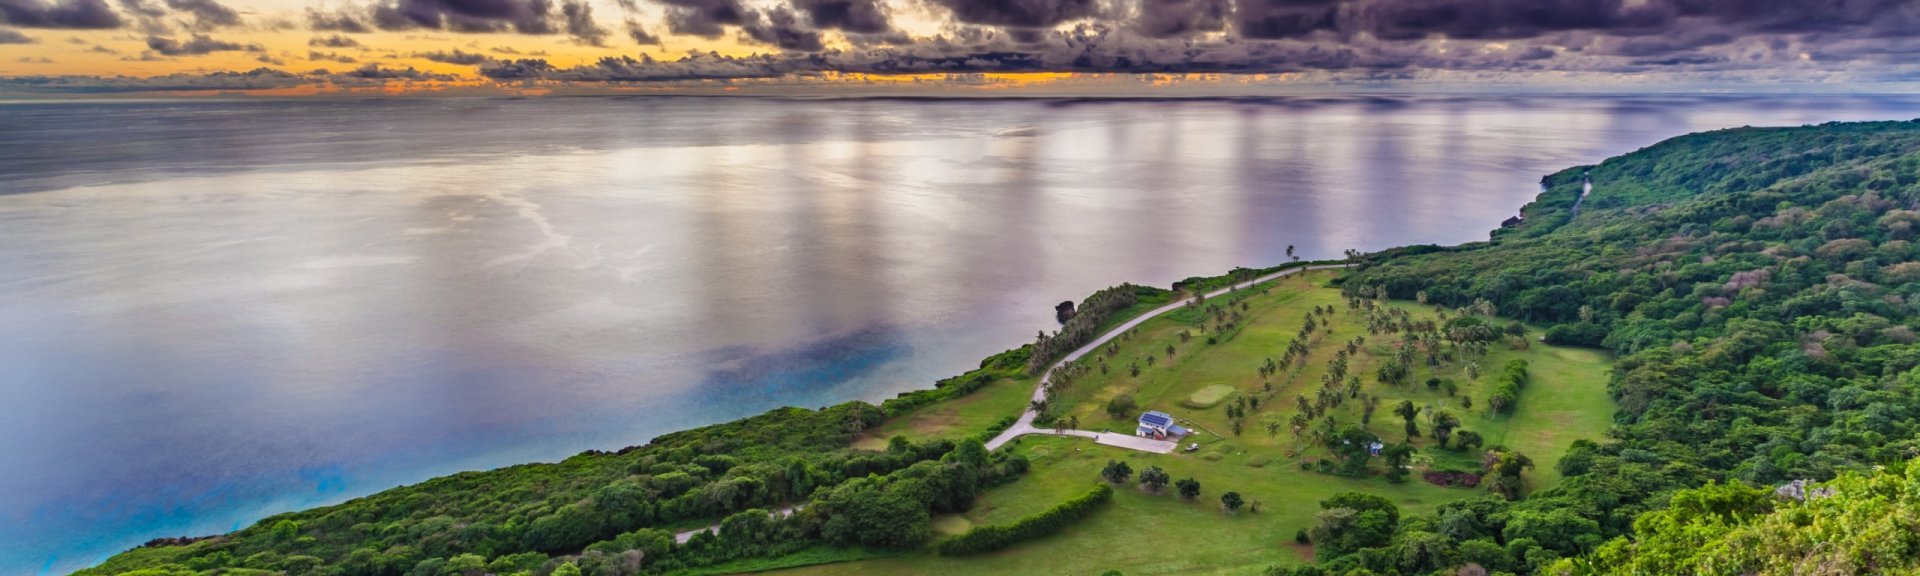 View over the golf course from the lookout. Photo: [Wondrous World Images](https://www.wondrousworldimages.com.au)